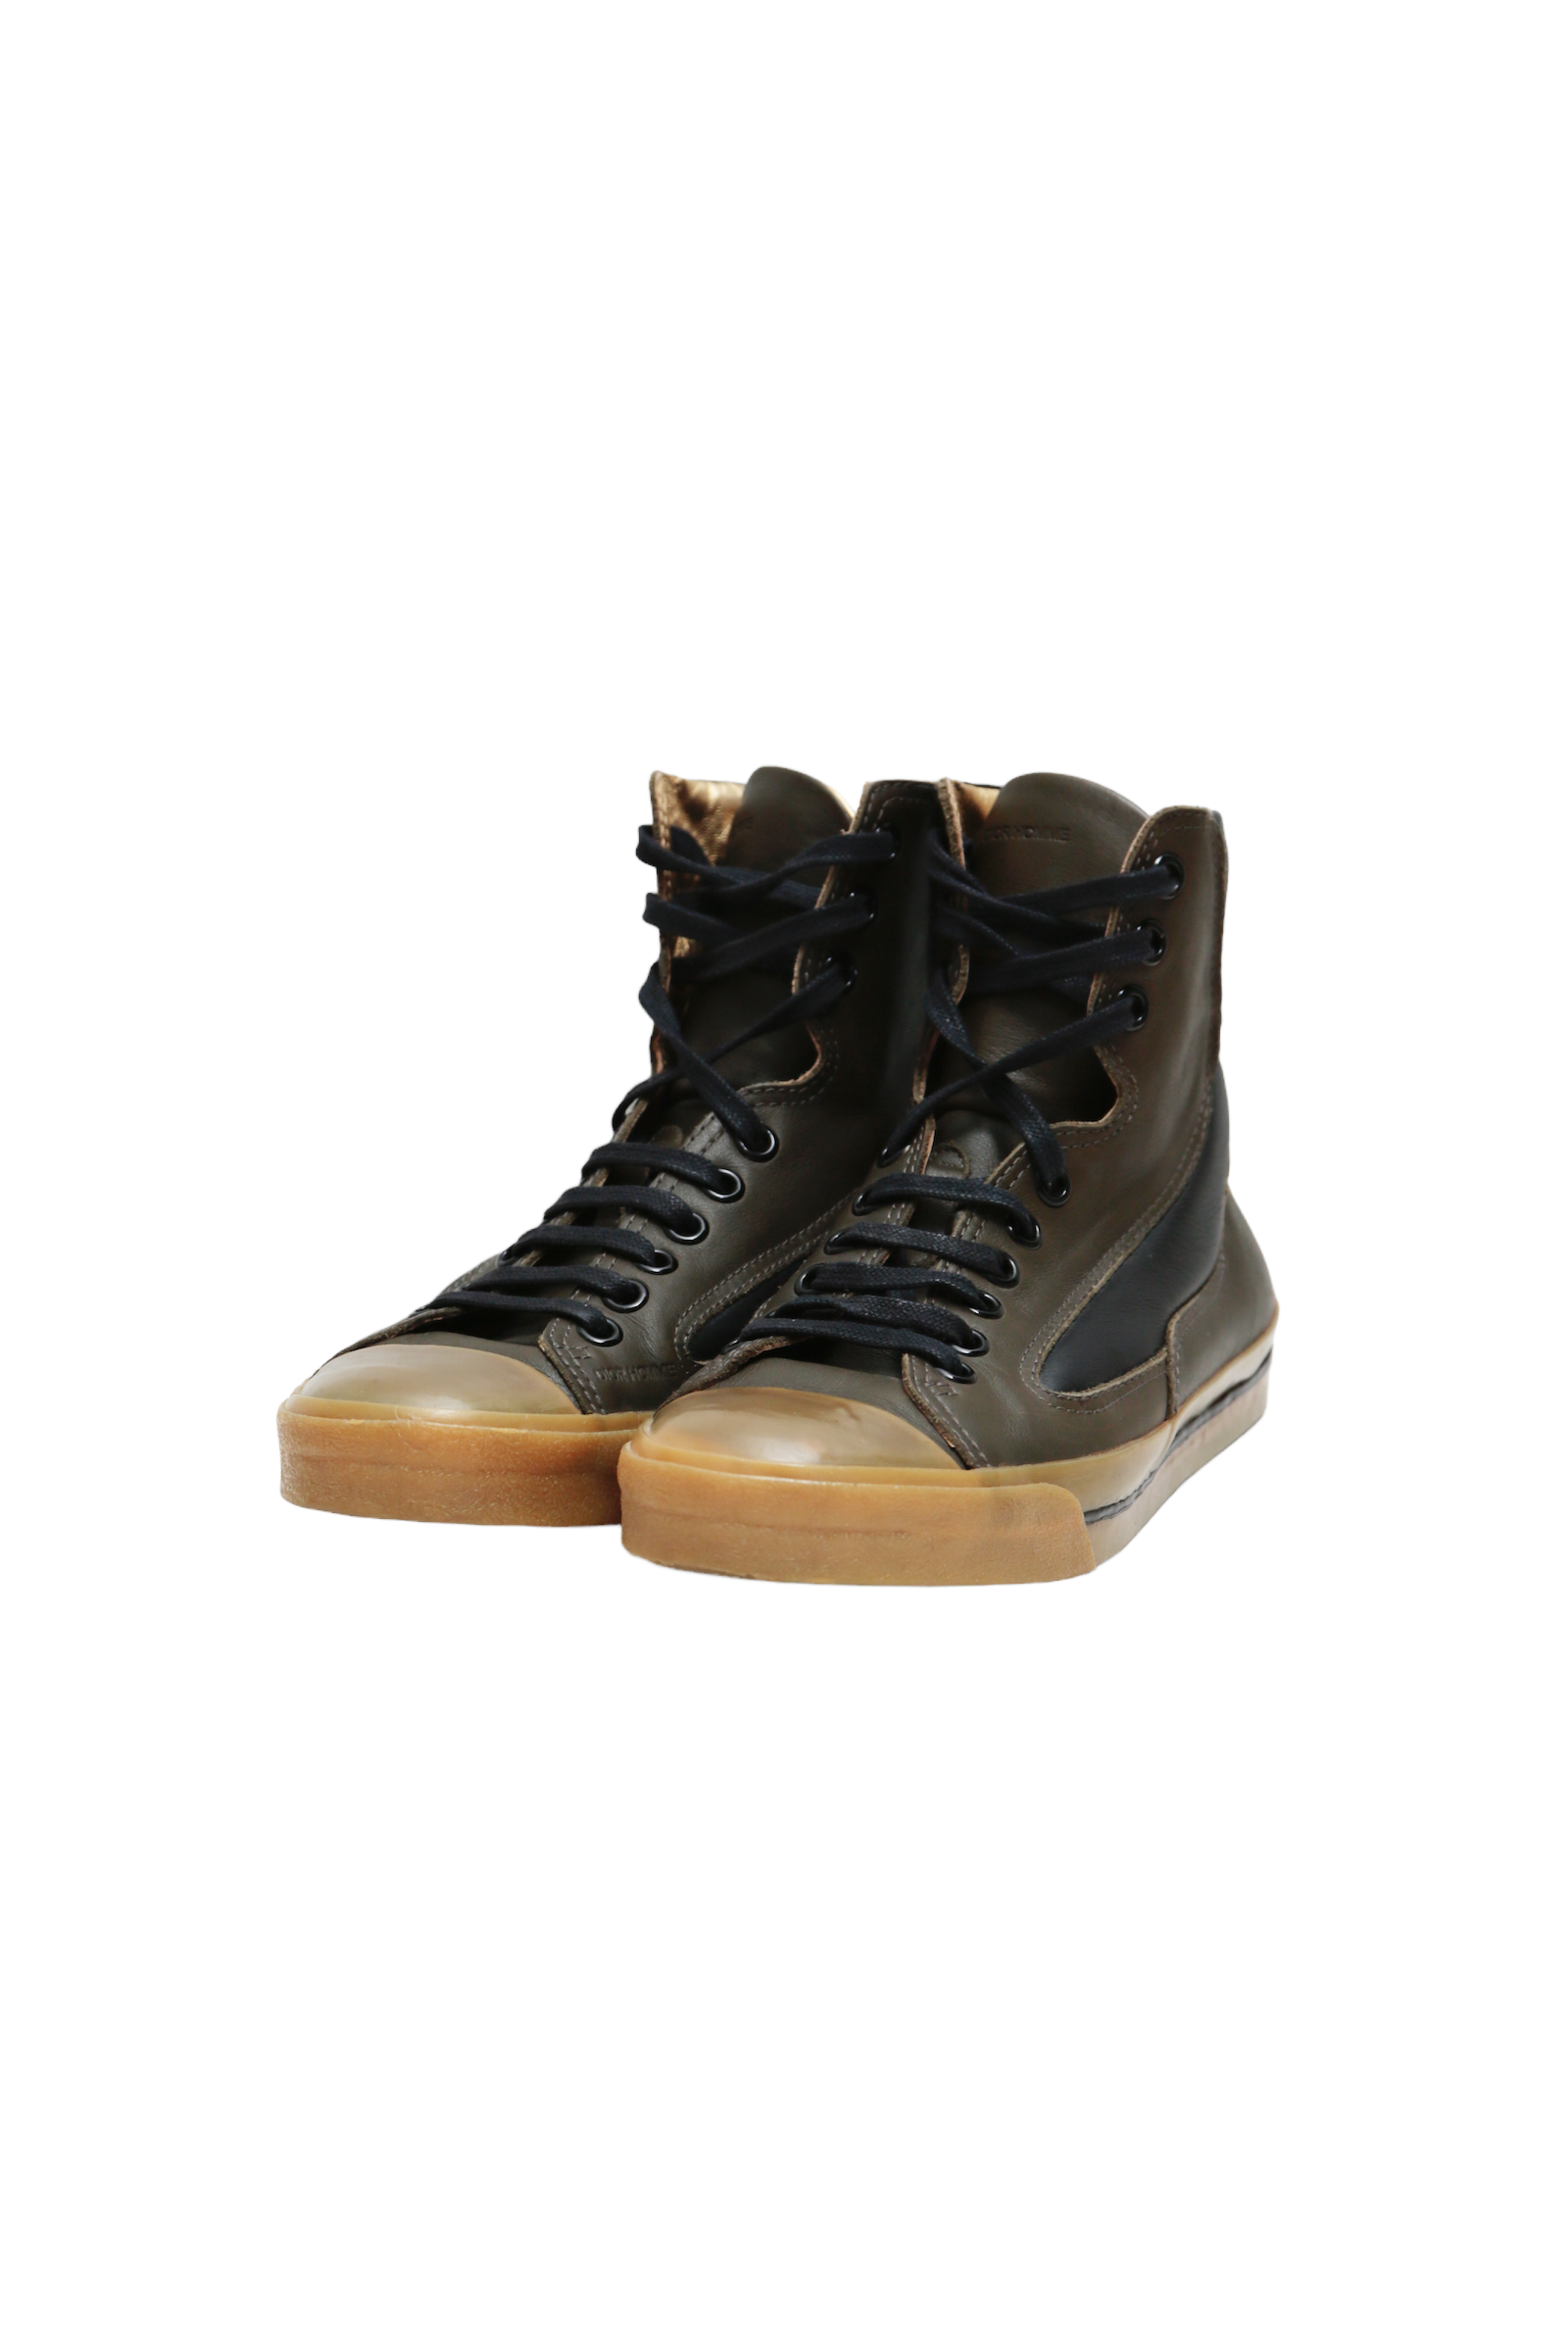 DIOR HOMME RUBBER SOLE SNEAKER